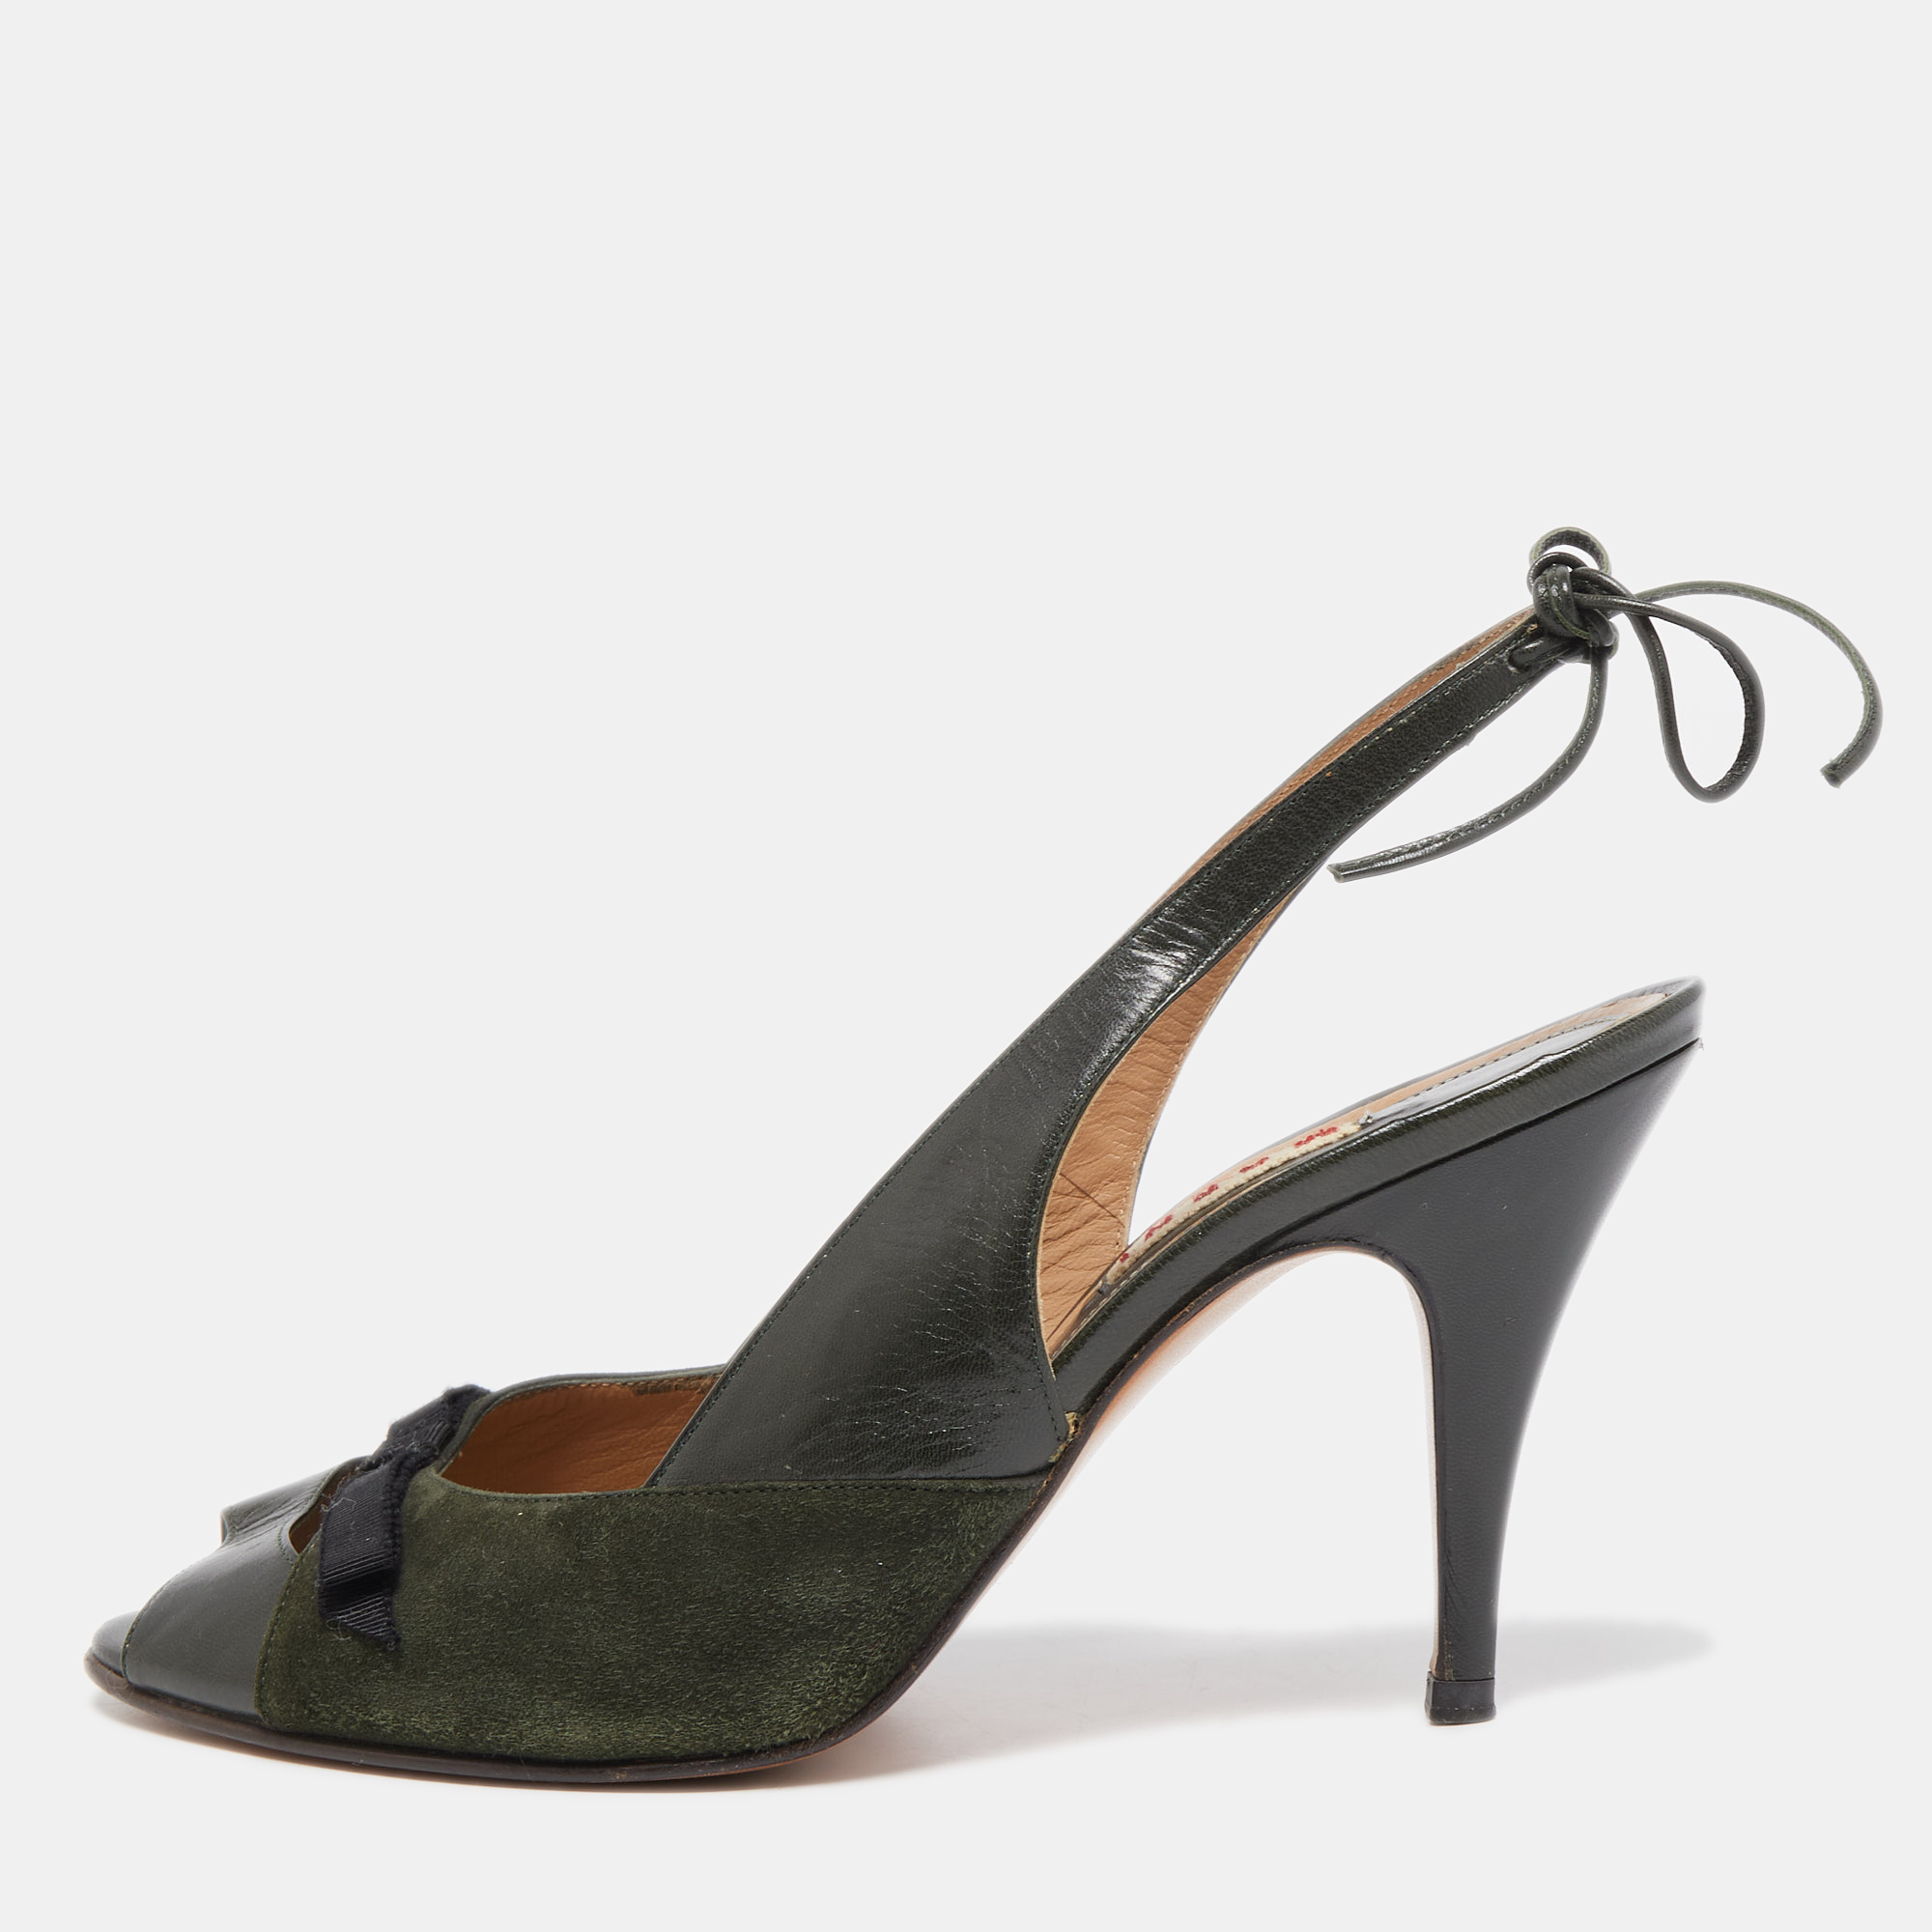 

Marni Dark Green Leather and Suede Peep Toe Tie Knot Slingback Sandals Size